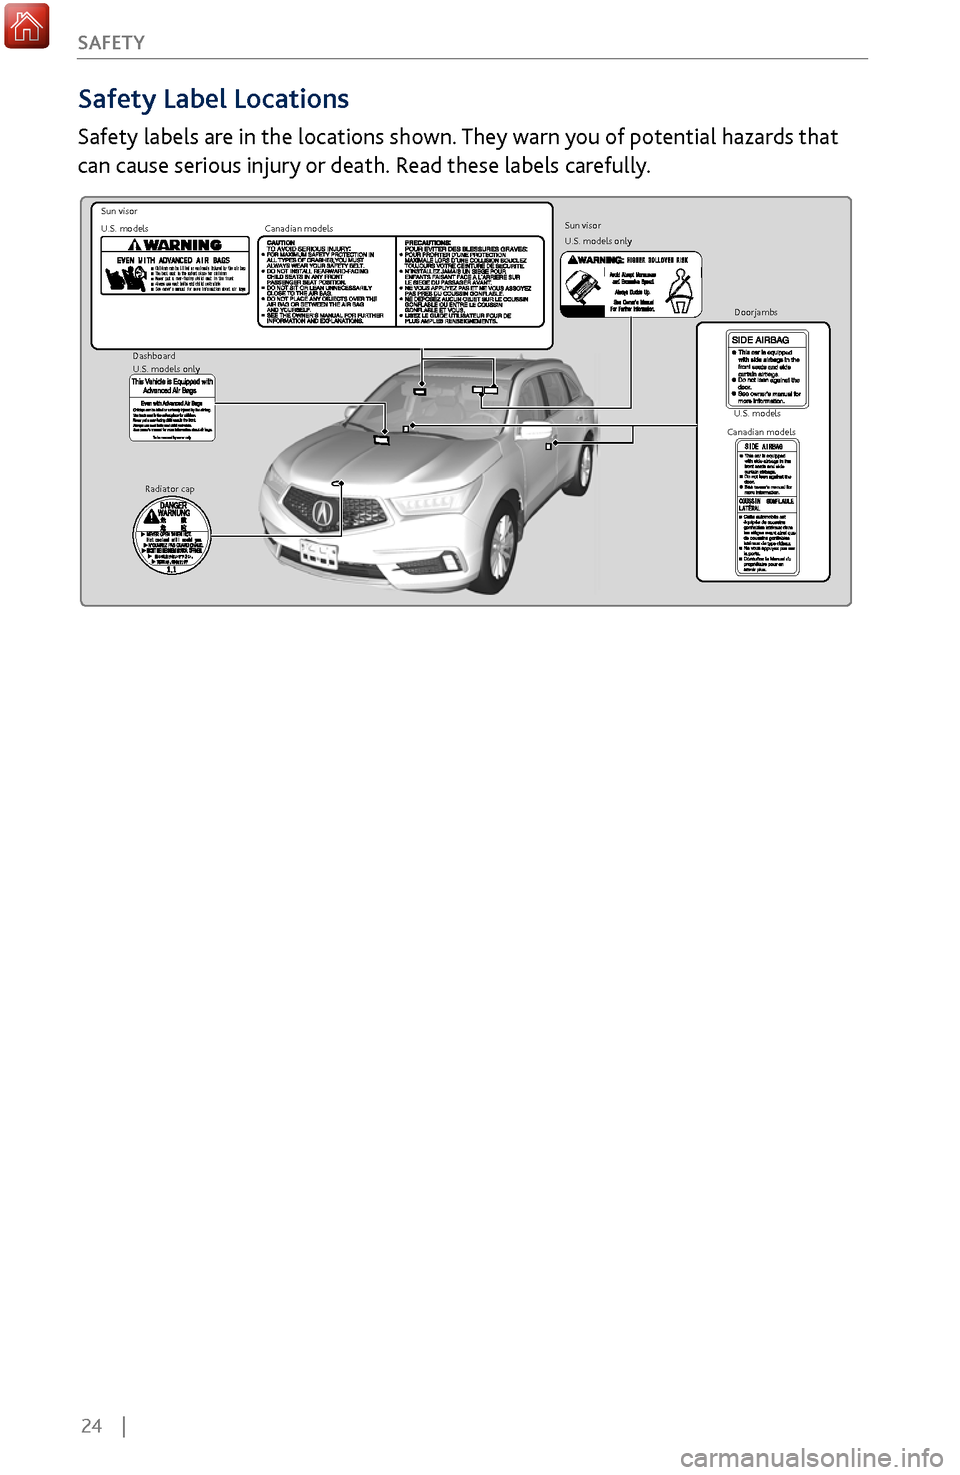 Acura MDX 2017 Service Manual 24    |
S
AFETY
Safety Label Locations
Safety labels are in the locations shown. They warn you of potential hazards that 
can cause serious injury or death. Read these labels carefully.
Sun viso
r
U.S